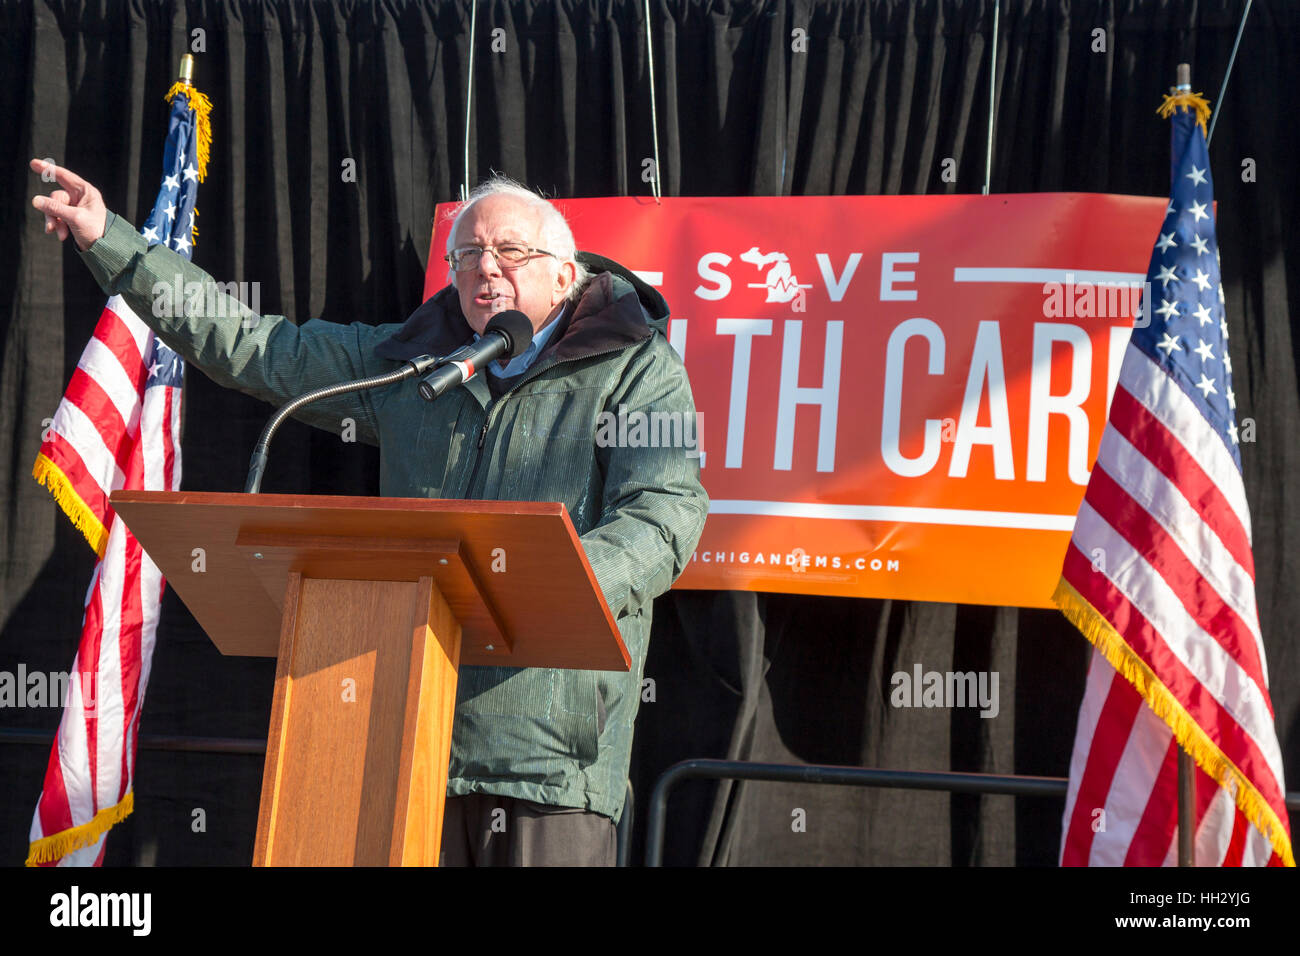 Detroit, Michigan USA - 15 January 2017 - Senator Bernie Sanders speaks as thousands of Detroit-area residents joined a 'Save Health Care Rally,' part of a national Day of Action opposing Republican attempt to dismantle Obamacare. ©: Jim West/Alamy Live News Stock Photo